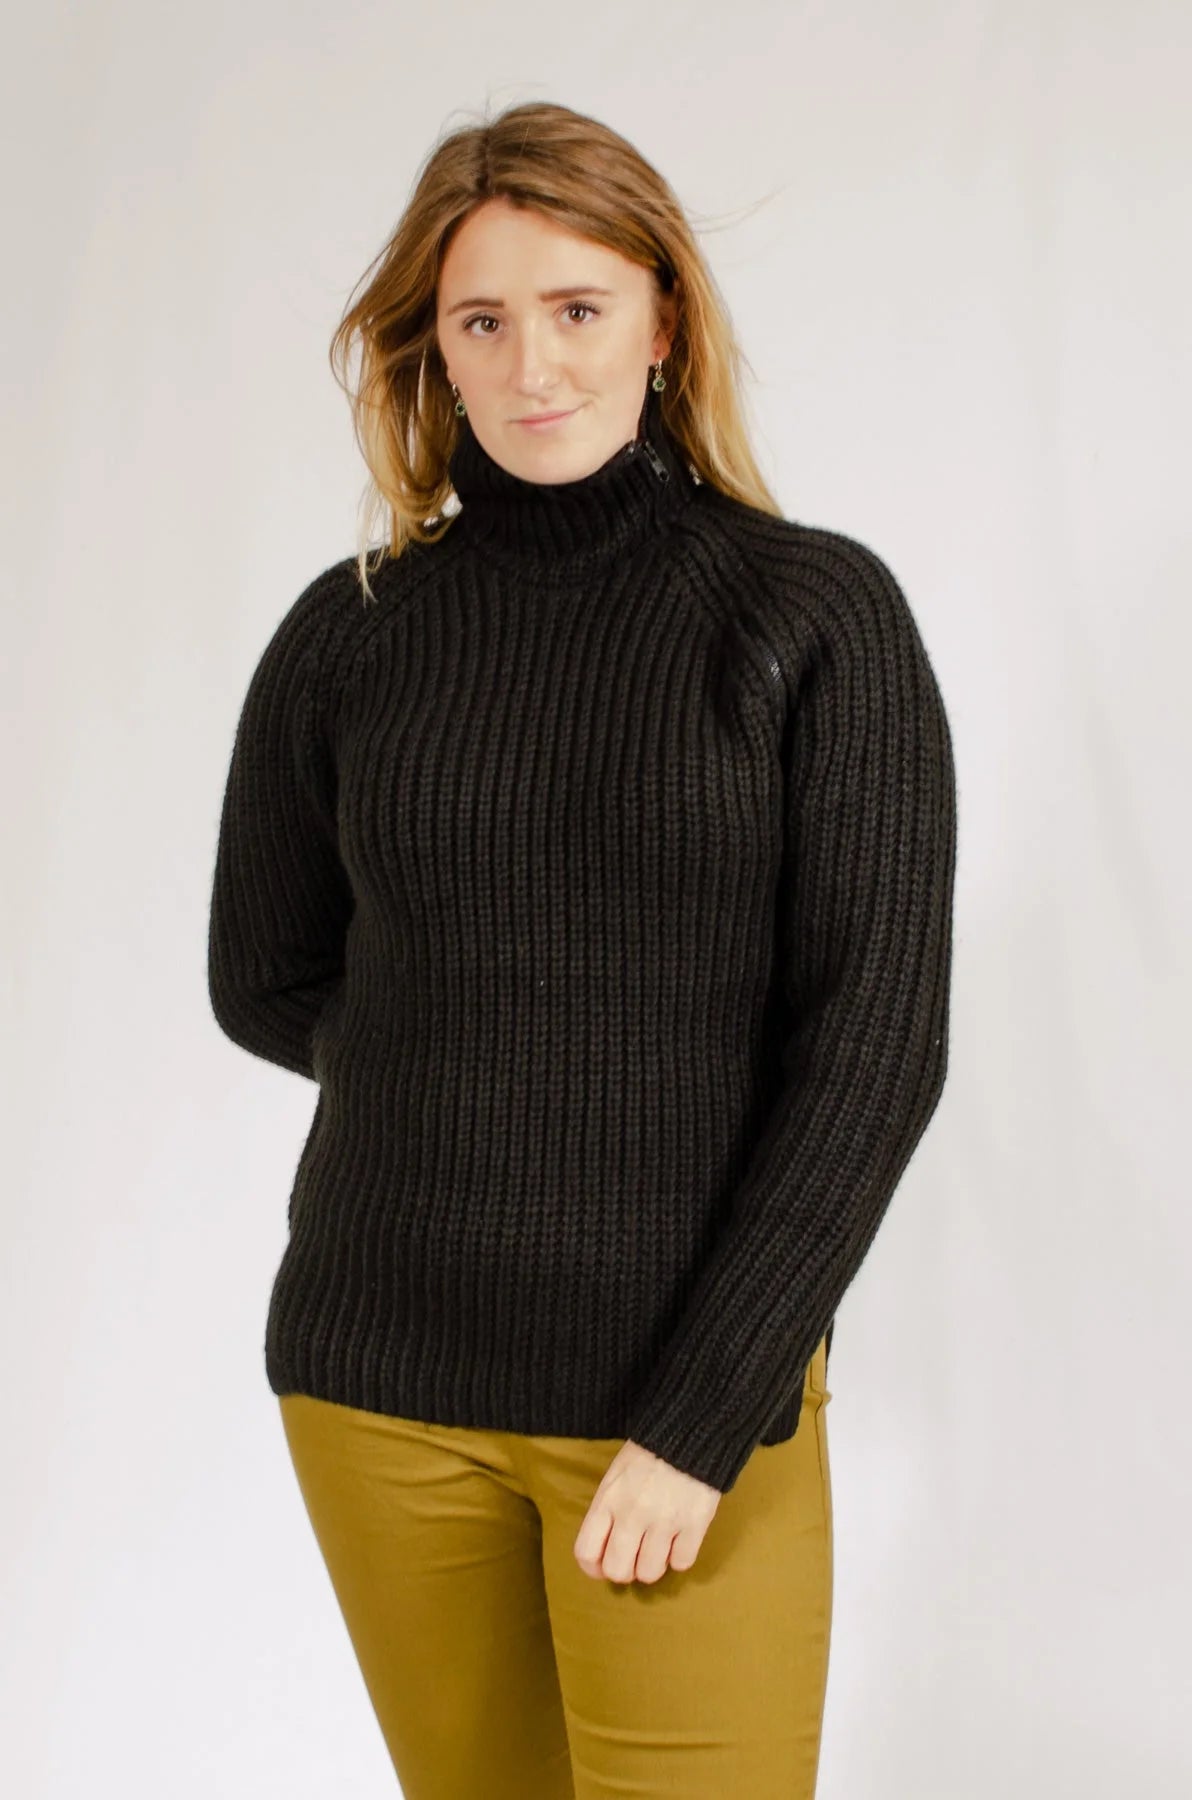 H&M Zip Neck Chunky Ribbed Jumper